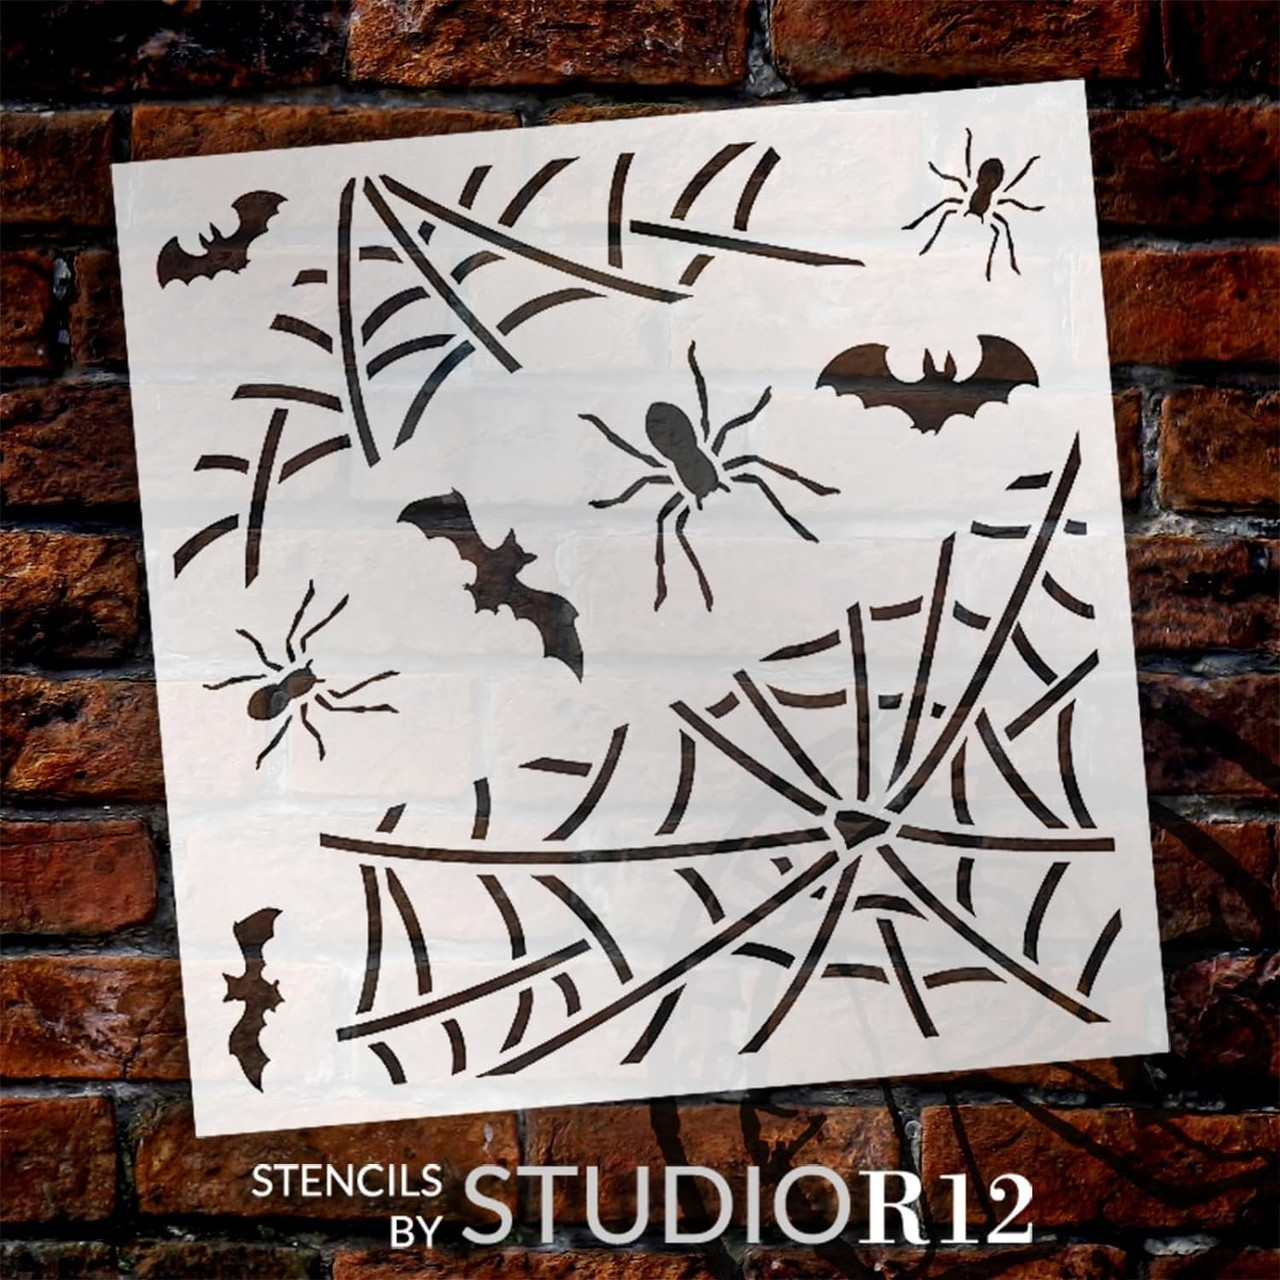 Spider Web Embellishment Stencil with Bats by StudioR12 - USA Made - DIY Halloween Decorations - Reusable Template for Crafting & Painting Wood Signs - STCL7184